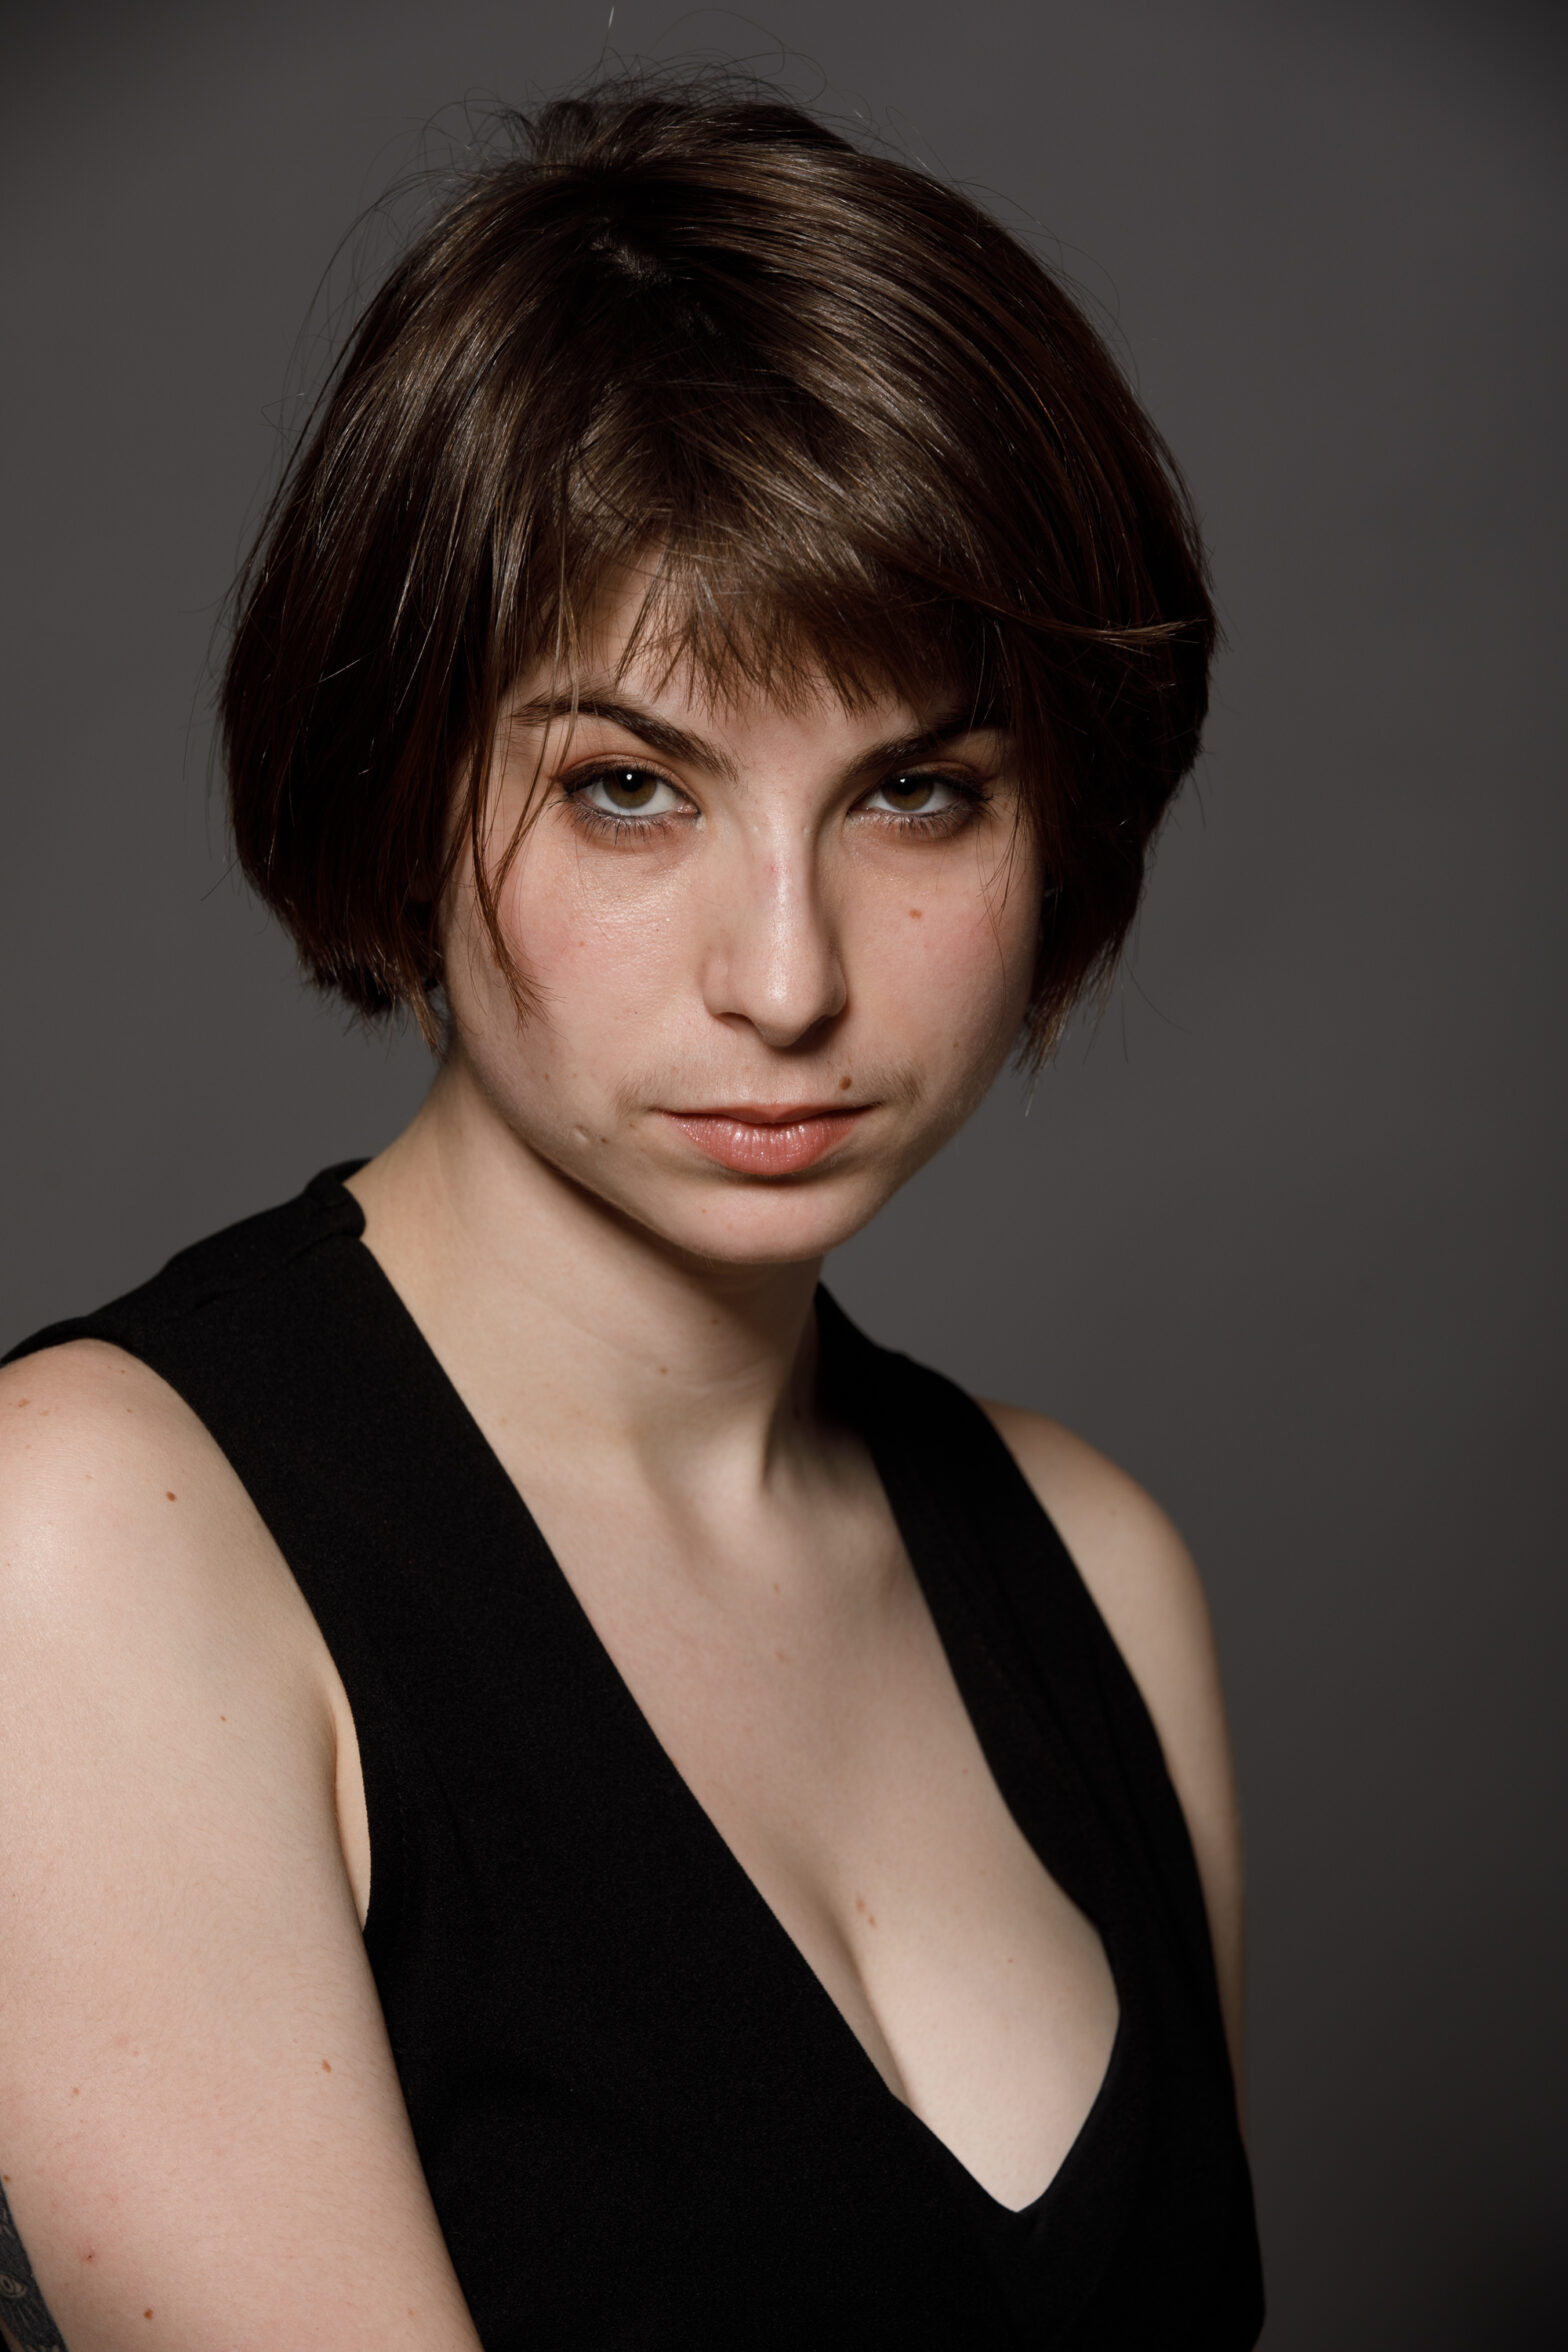 Headshot of artist with neck-length brown hair, dark eyes and a v-neck black top. Dark backdrop behind.